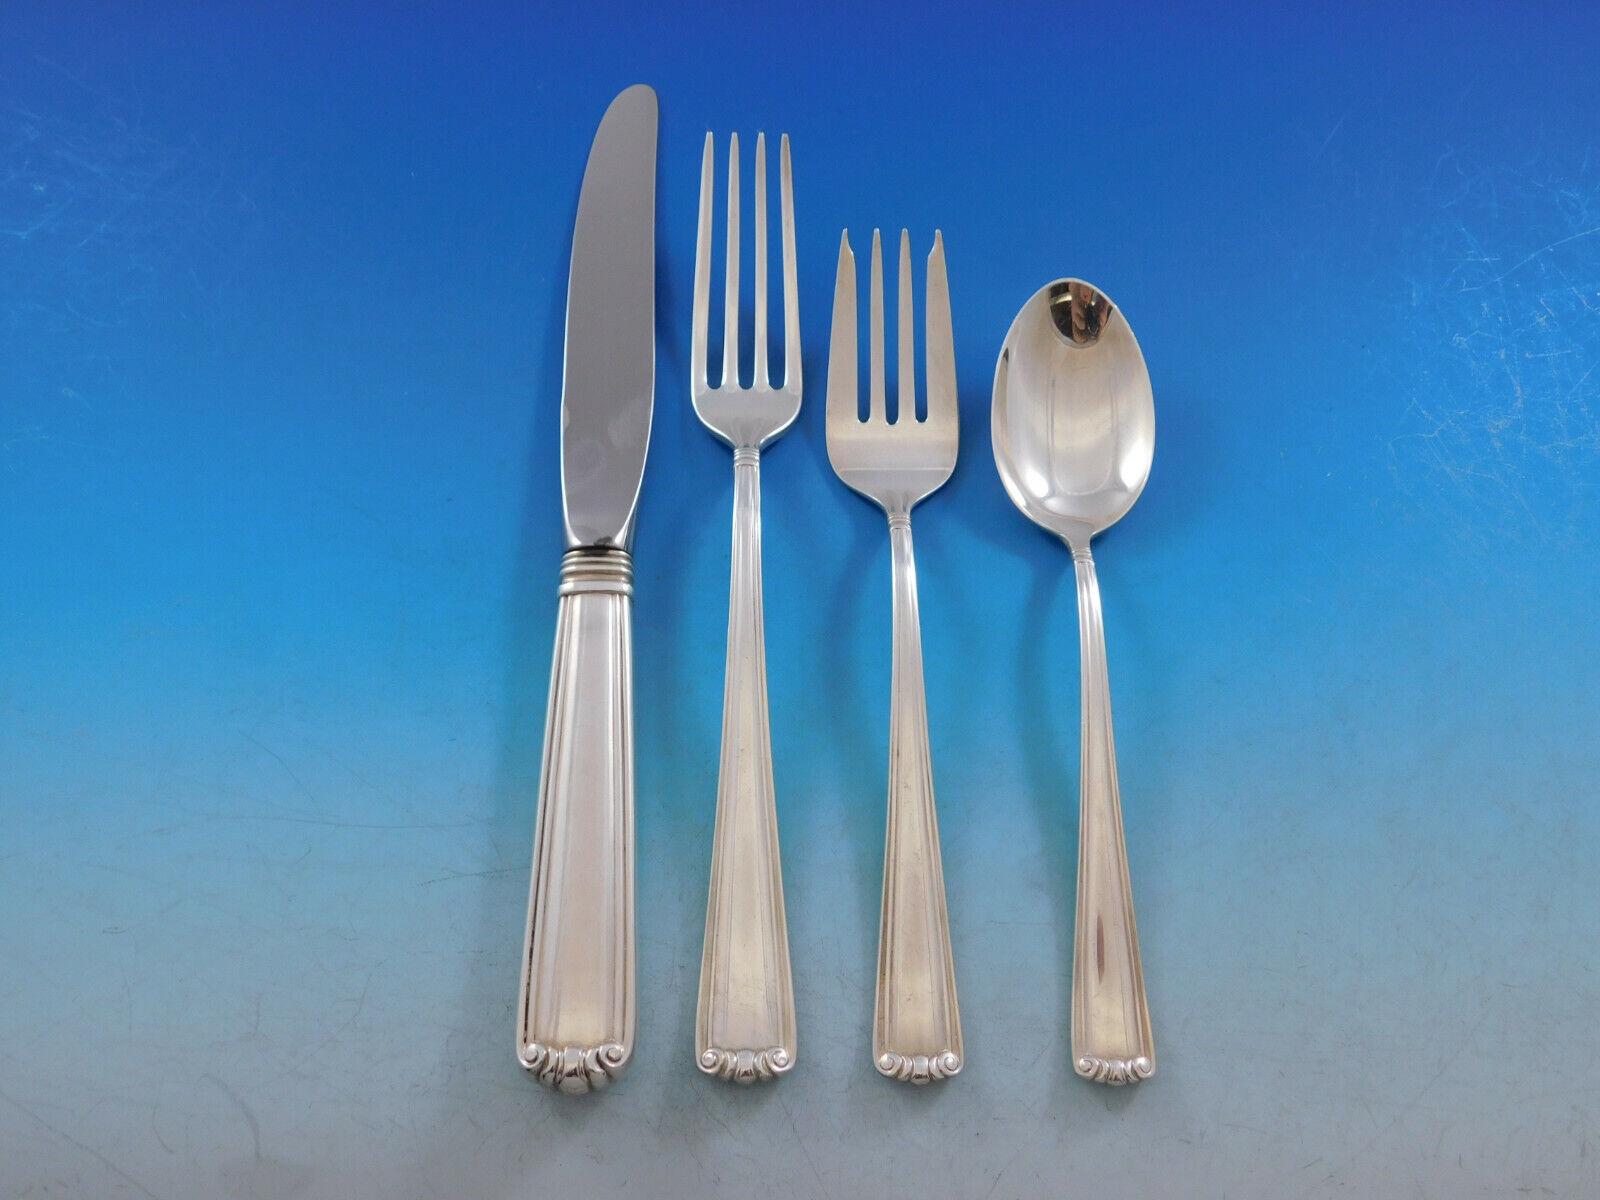 Superb Embassy Scroll by Lunt sterling silver Flatware set, 63 pieces. This set includes:

12 Knives, 8 3/4